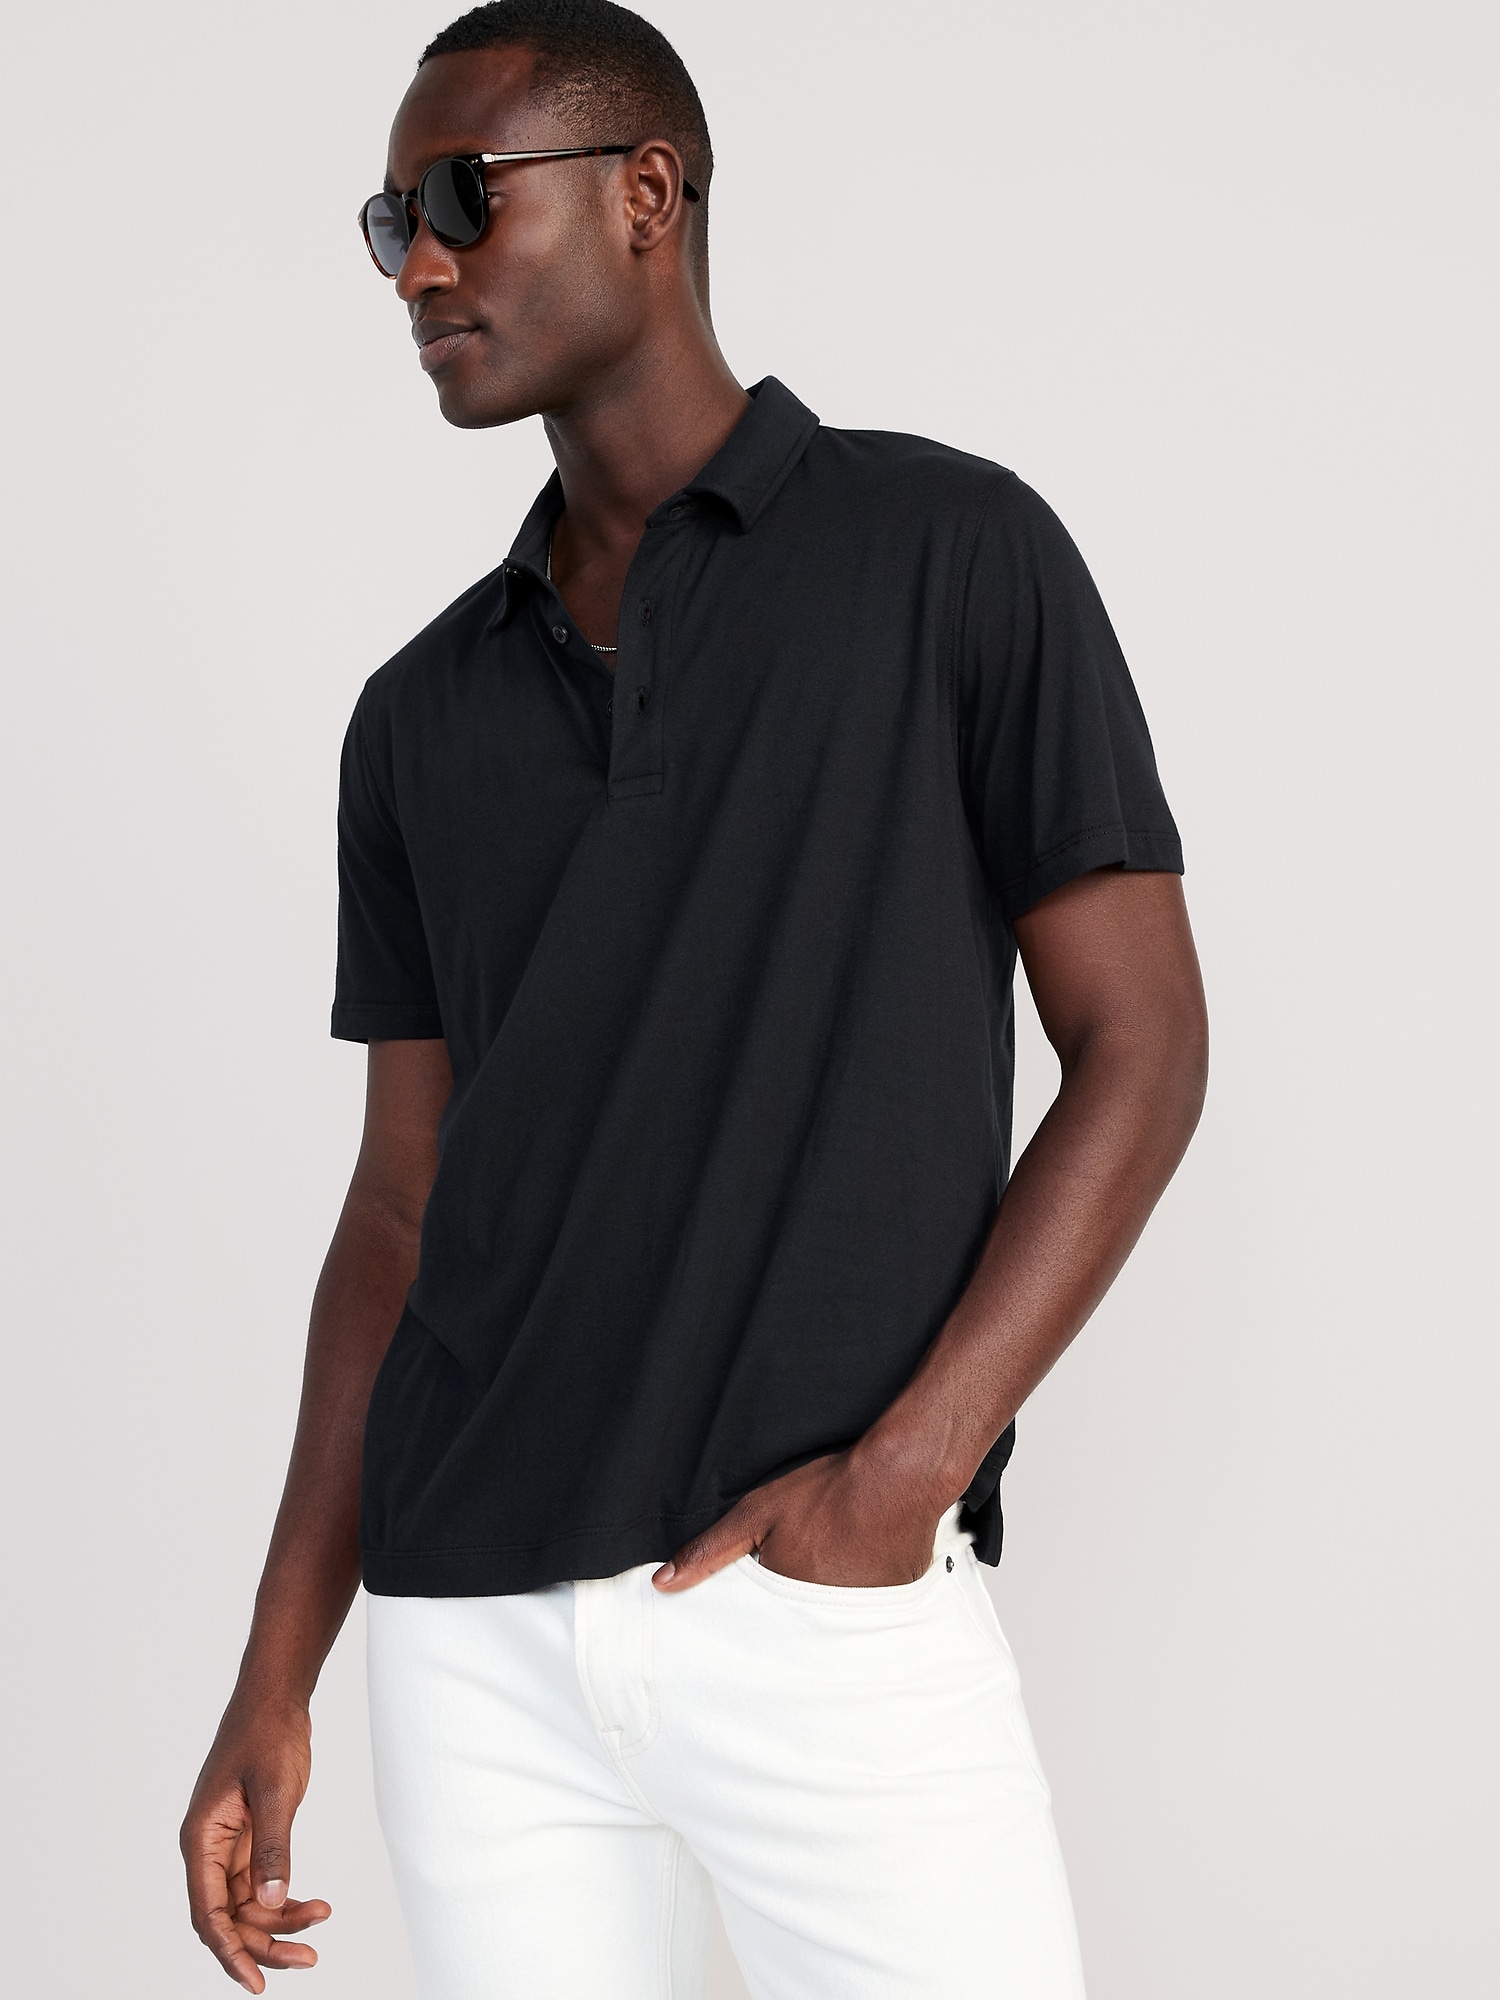 Old Navy Classic Fit Jersey Polo for Men black. 1